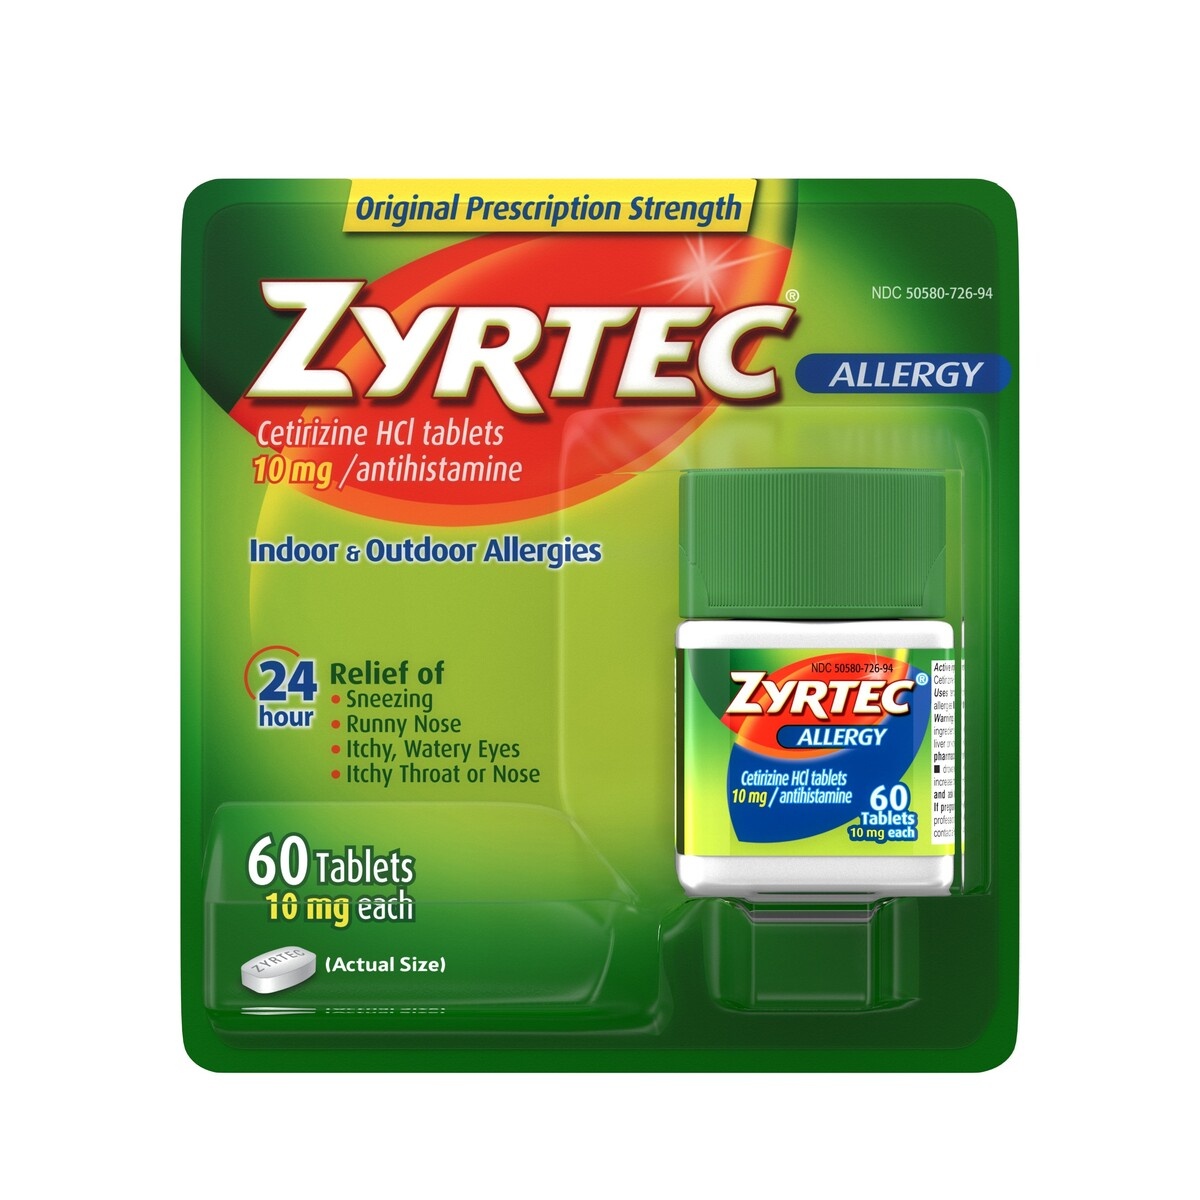 slide 4 of 4, Zyrtec 24 Hour Allergy Relief Tablets, Indoor & Outdoor Allergy Medicine with 10 mg Cetirizine HCl per Antihistamine Tablet, Relief from Runny Nose, Sneezing, Itchy Eyes & More, 60 ct